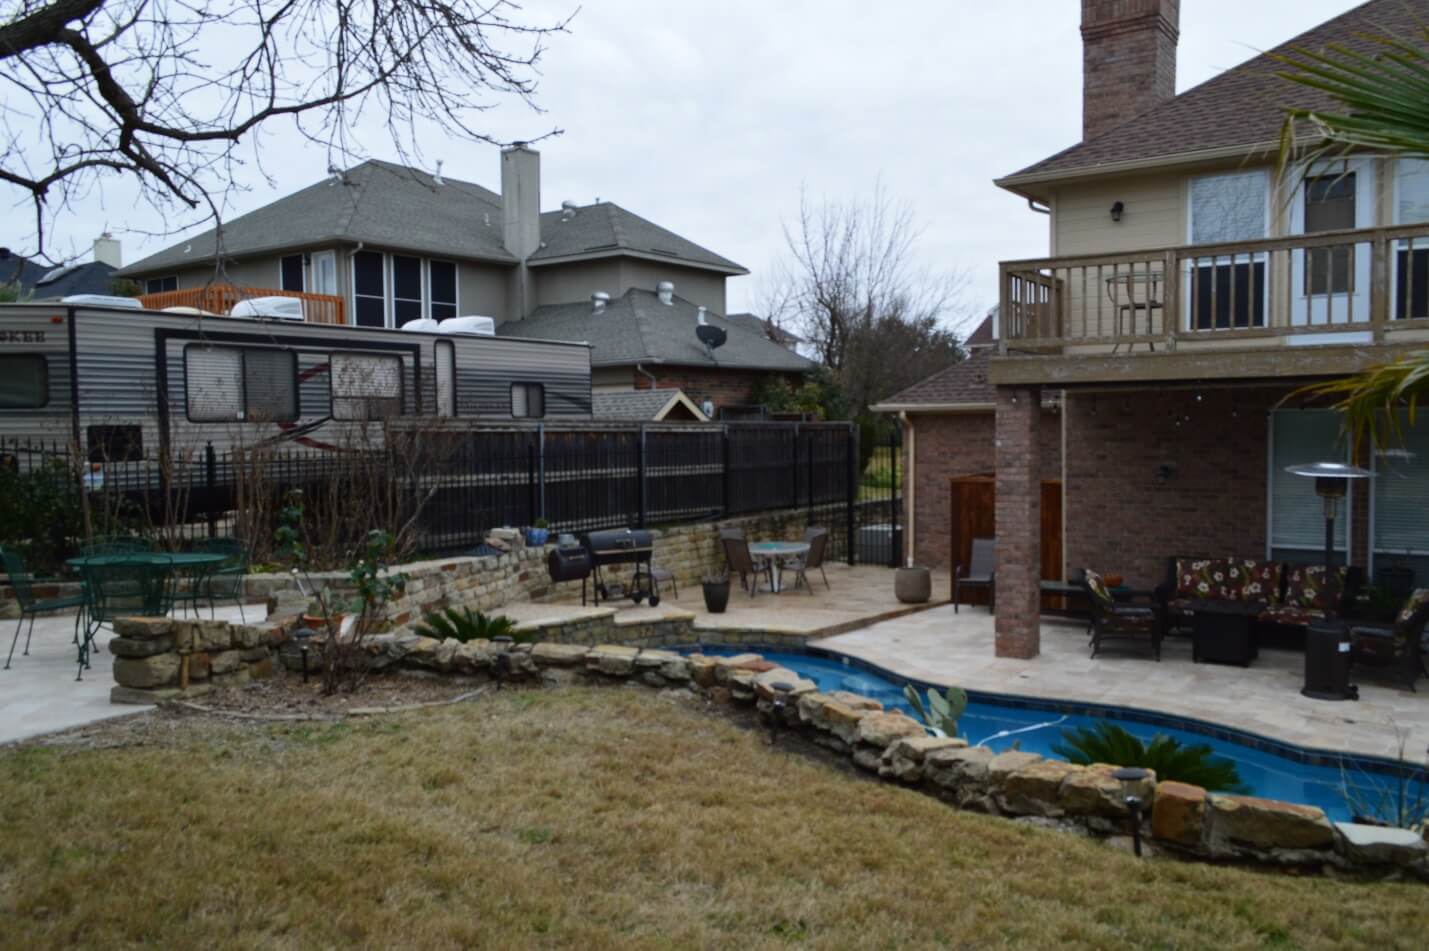 Home Outdoor Area With Pool And Covered Patio